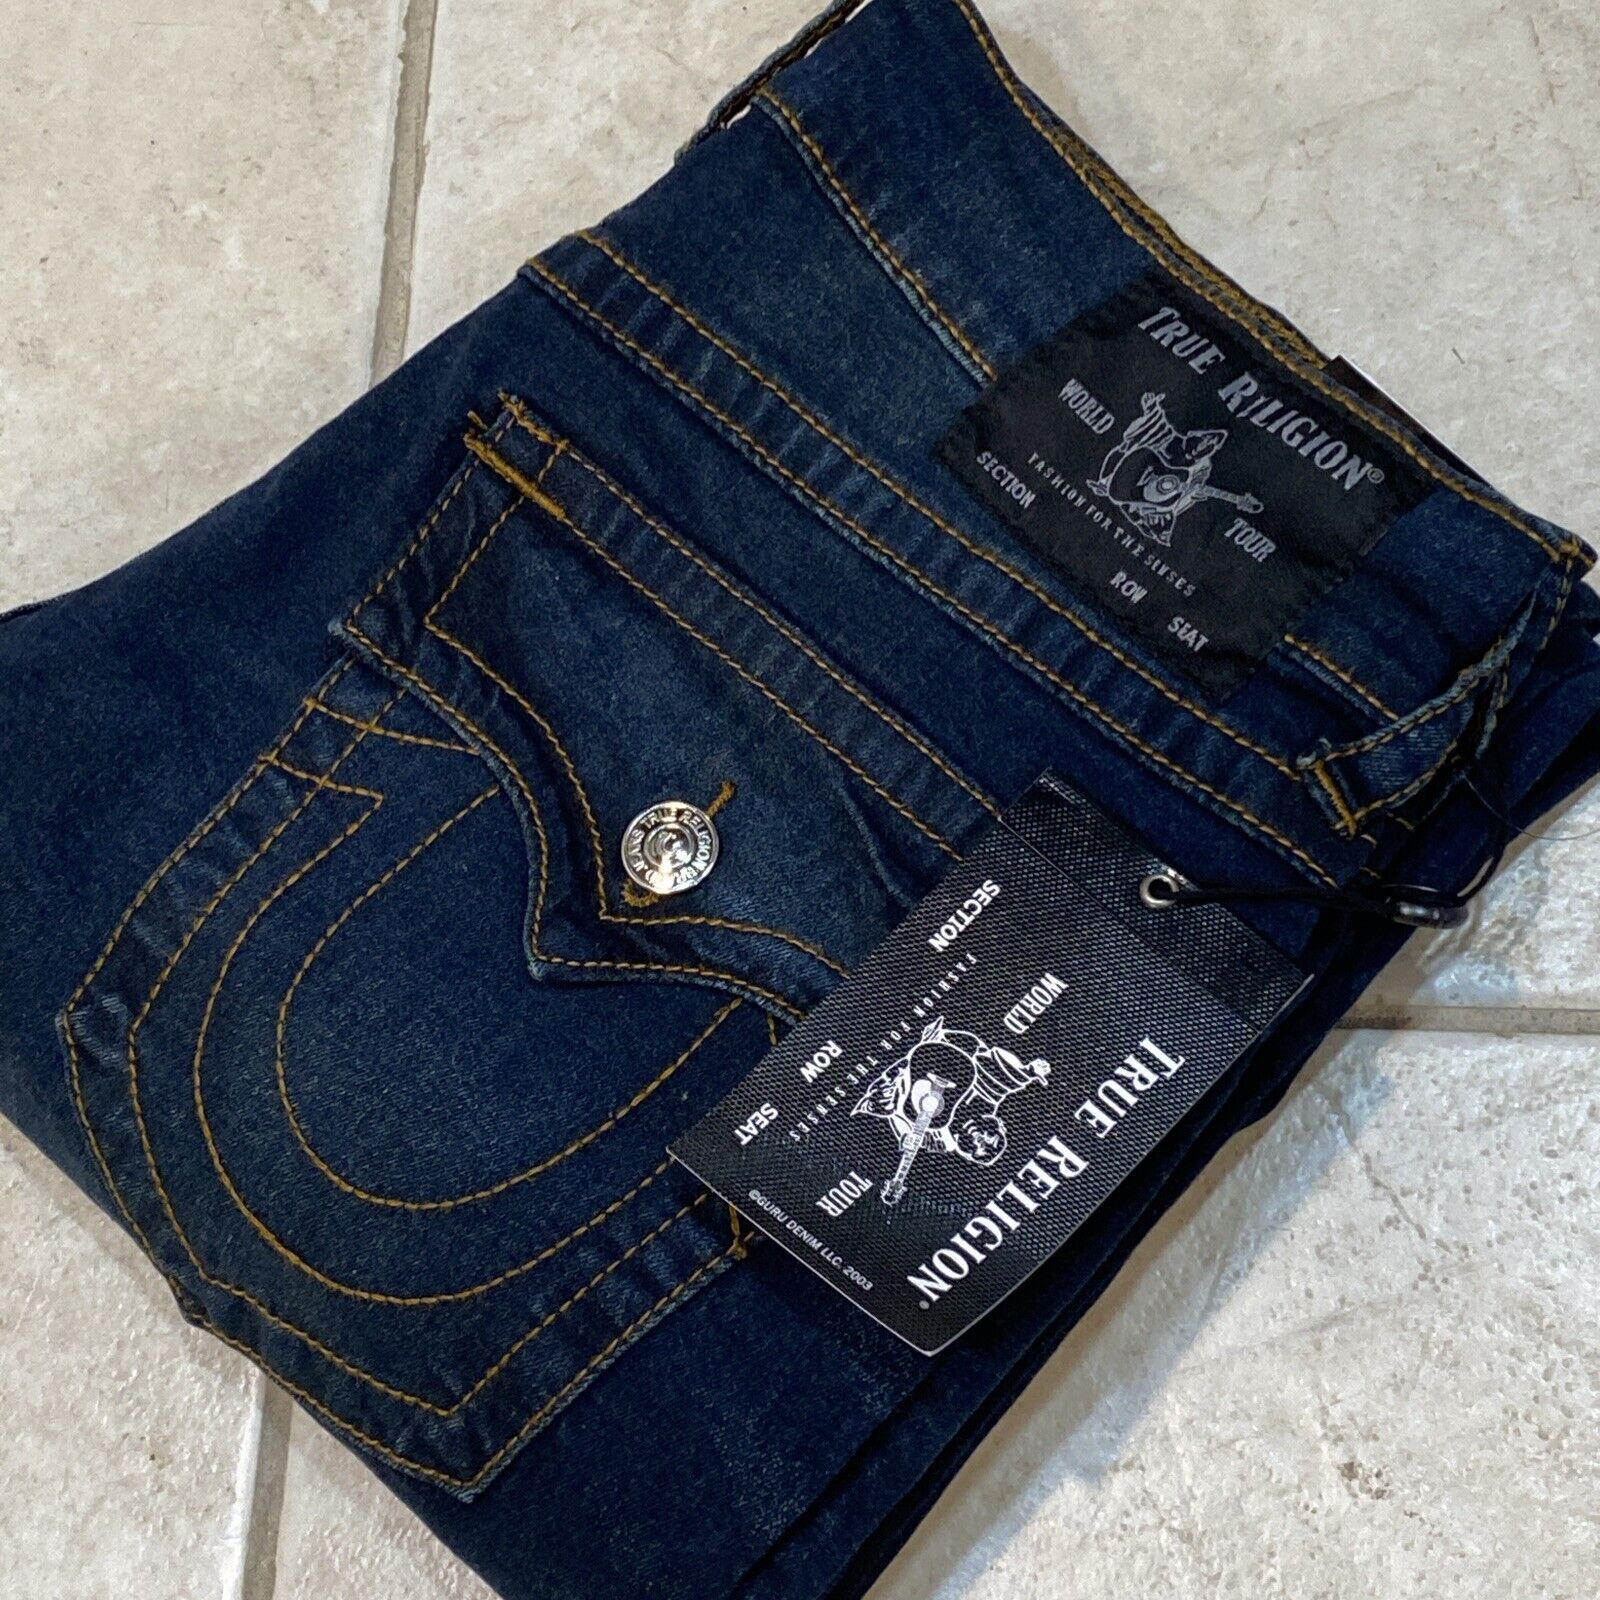 True Religion Ricky Flap Relaxed Thick Stitch Blue Jeans Men’s 34x32 $149     A5